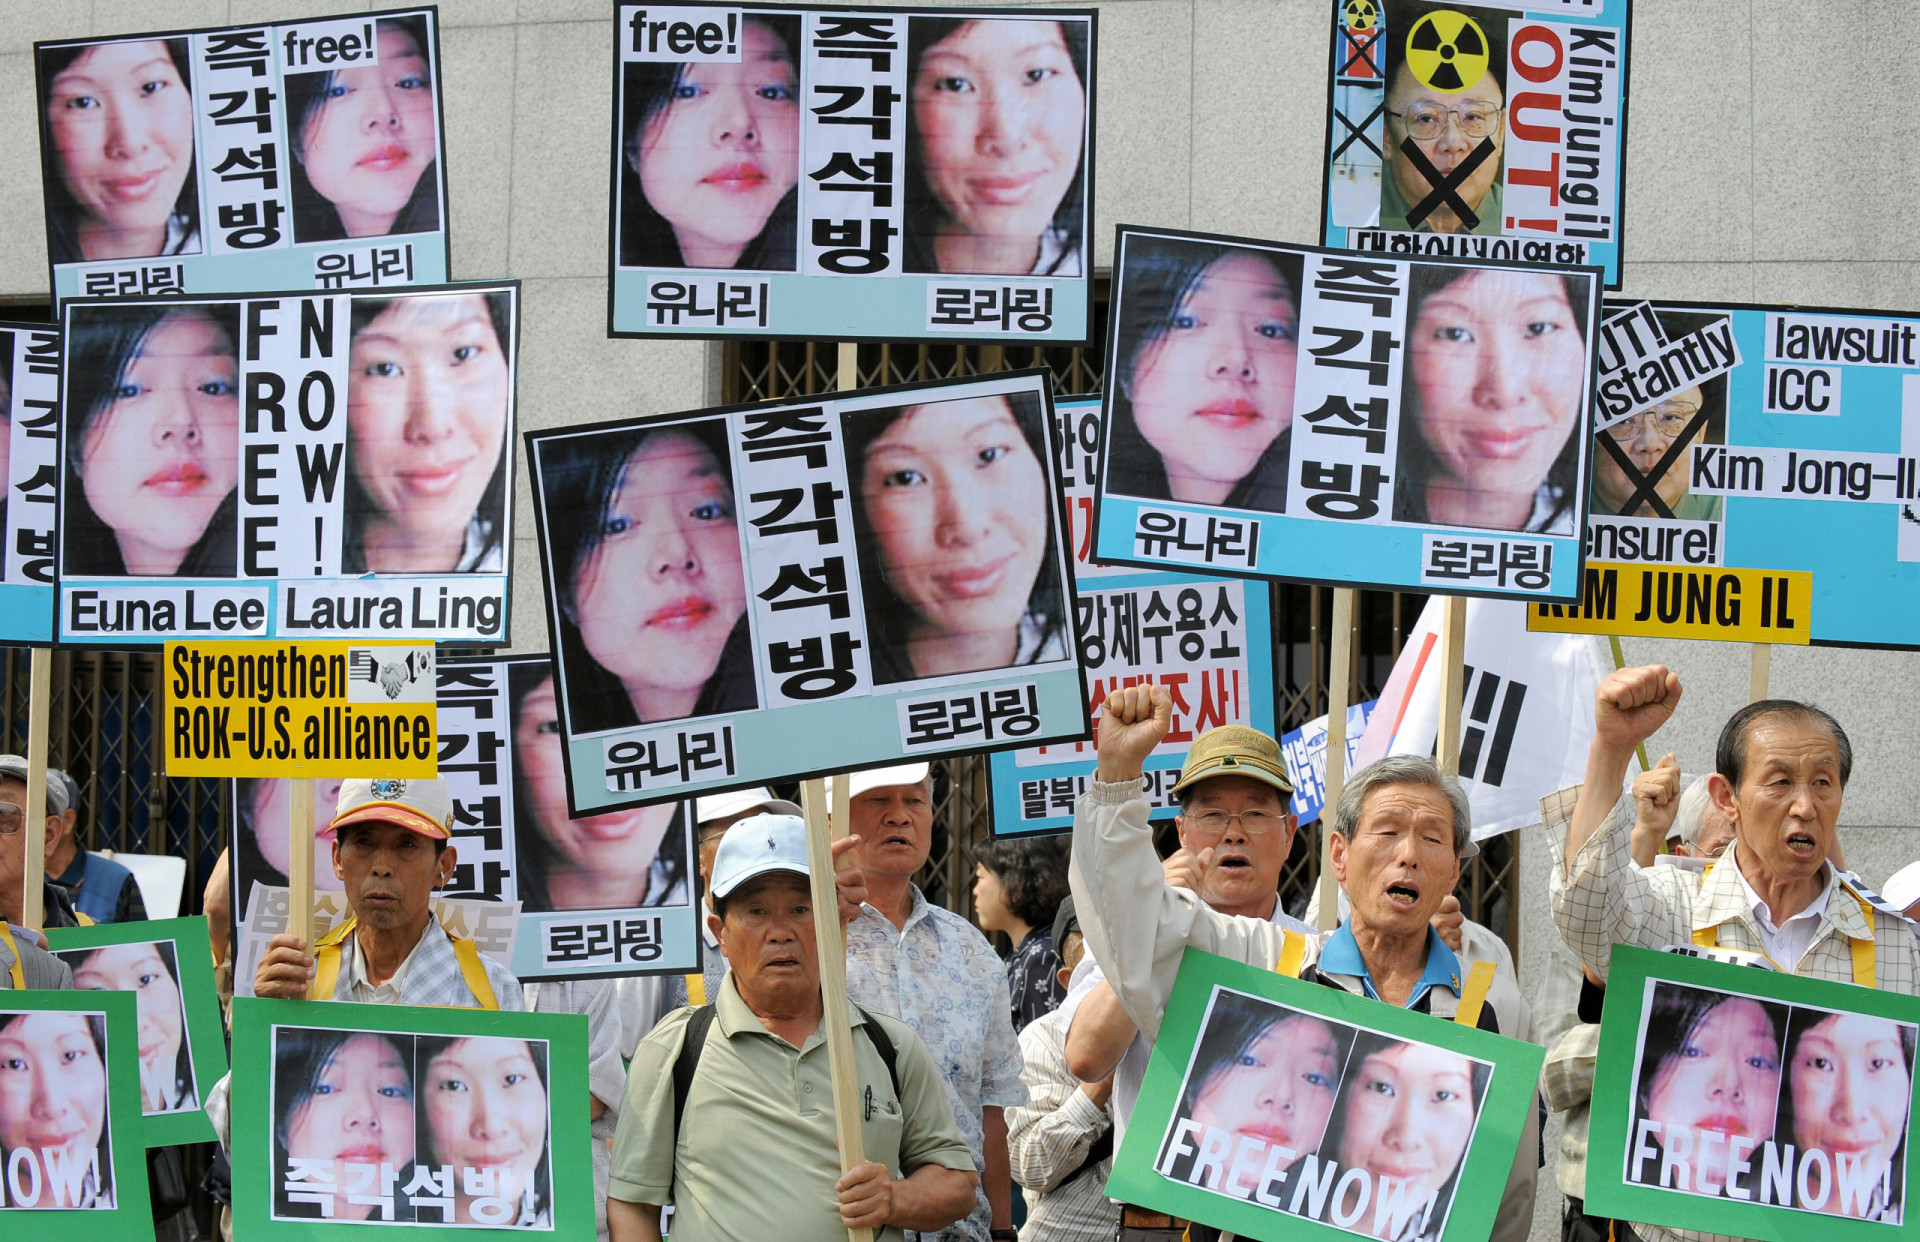 <p>On March 17, 2009, American journalists Euna Lee and Laura Ling (sister of Lisa Ling) were arrested in North Korea, after crossing the border from China without a visa.</p><p><a href="https://www.msn.com/en-us/community/channel/vid-7xx8mnucu55yw63we9va2gwr7uihbxwc68fxqp25x6tg4ftibpra?cvid=94631541bc0f4f89bfd59158d696ad7e">Follow us and access great exclusive content every day</a></p>